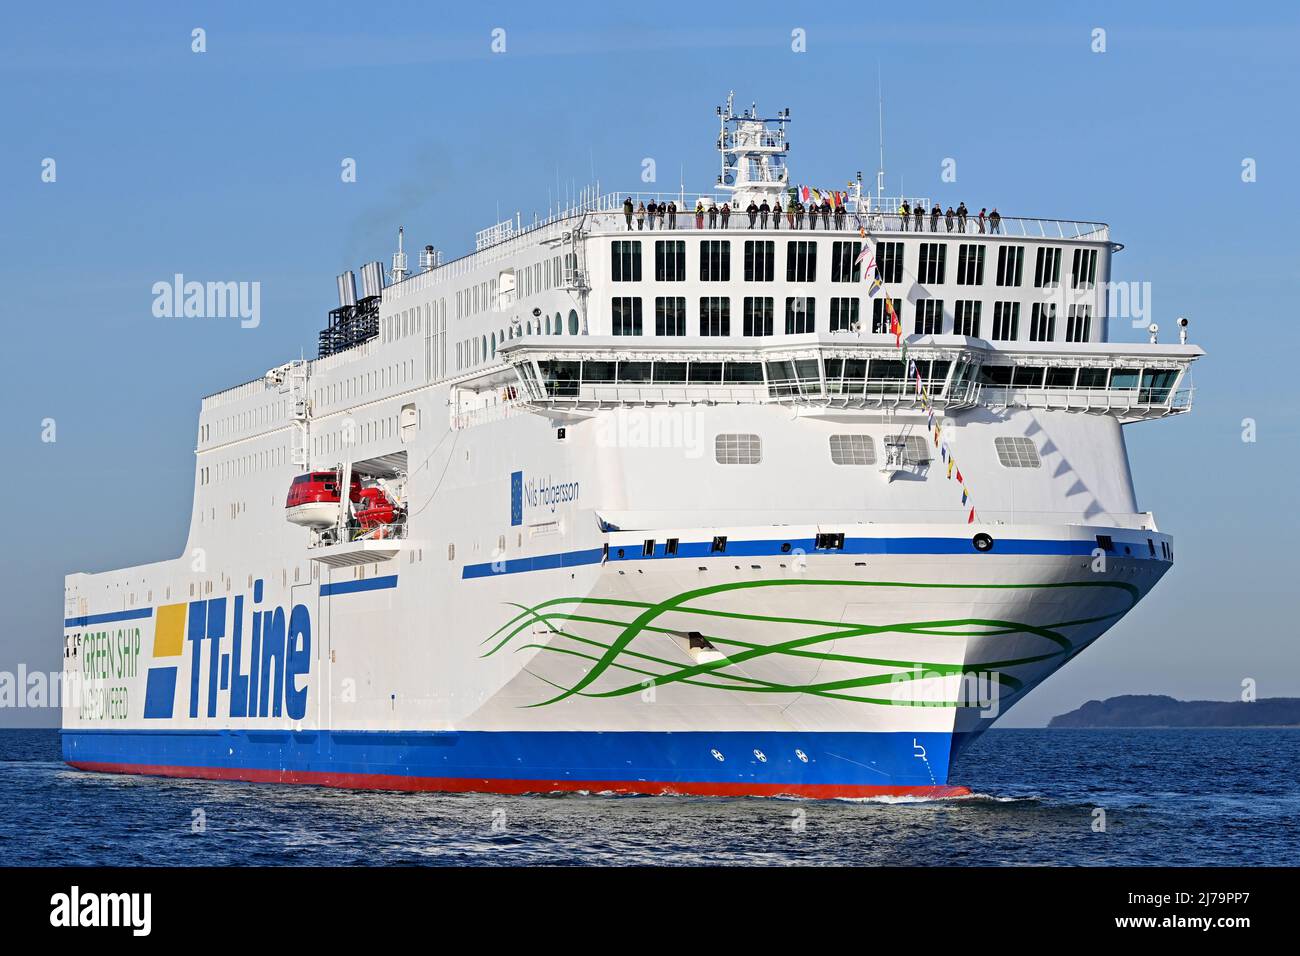 TT-Line's newbuilding Nils Holgersson arrives at Travemünde for the very firt time Stock Photo